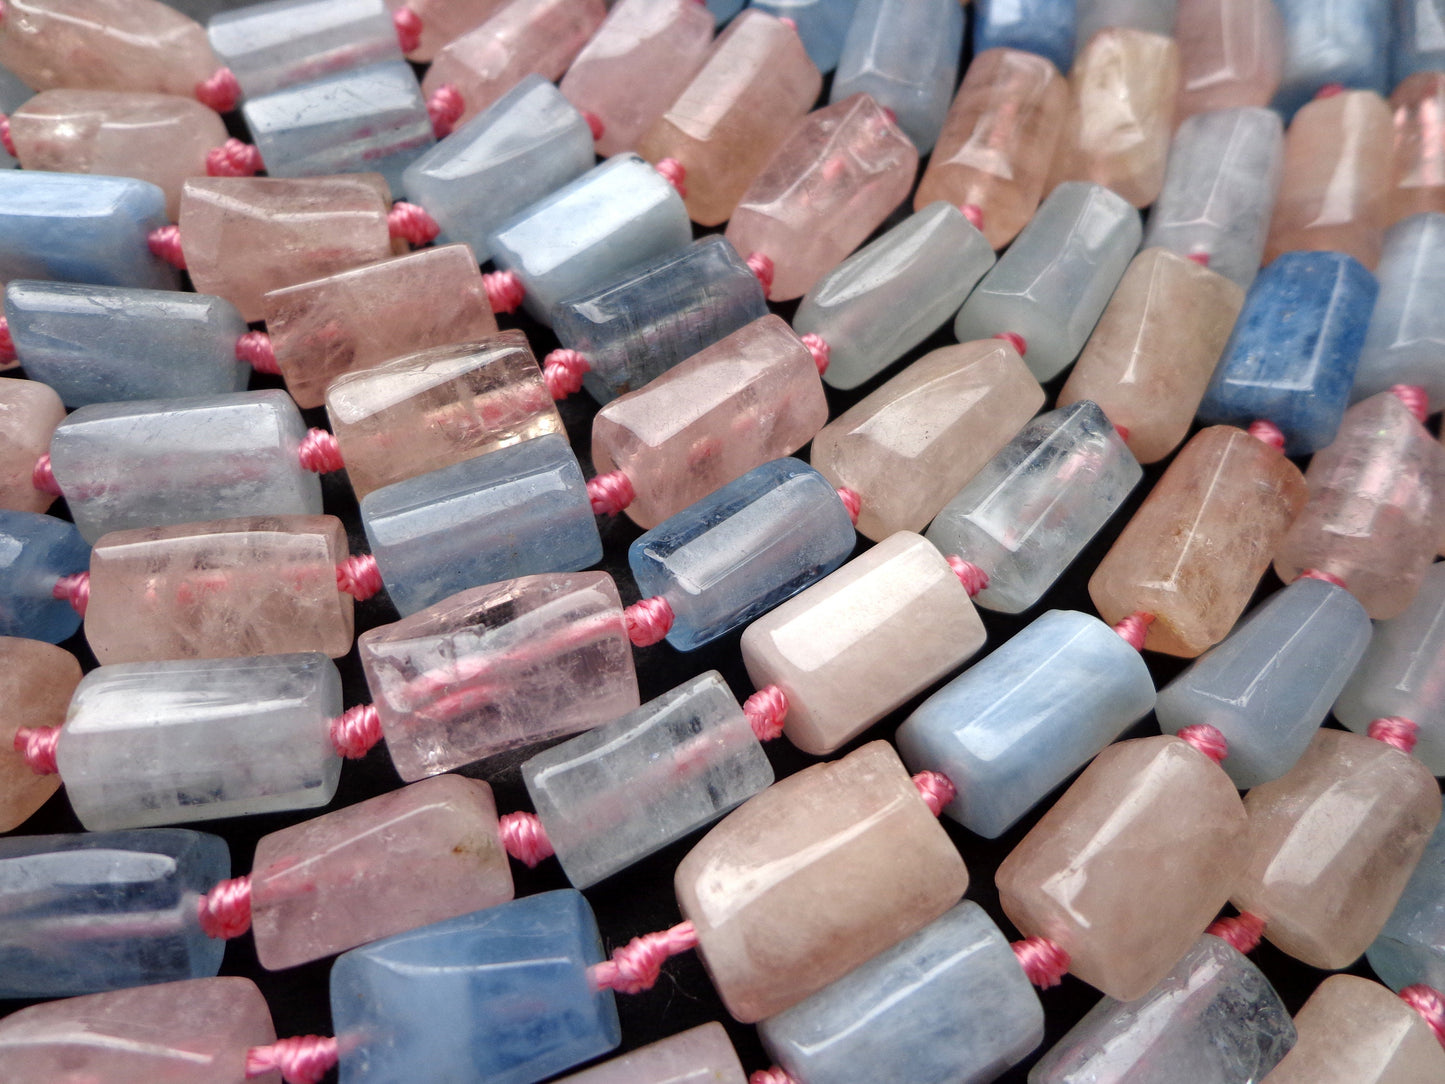 AAA Natural Morganite Gemstone Beads, 10x6mm, Faceted Cylinder Tube Shape, Gorgeous Blue & Pink Beads, Great Quality Beads, Full length 15"